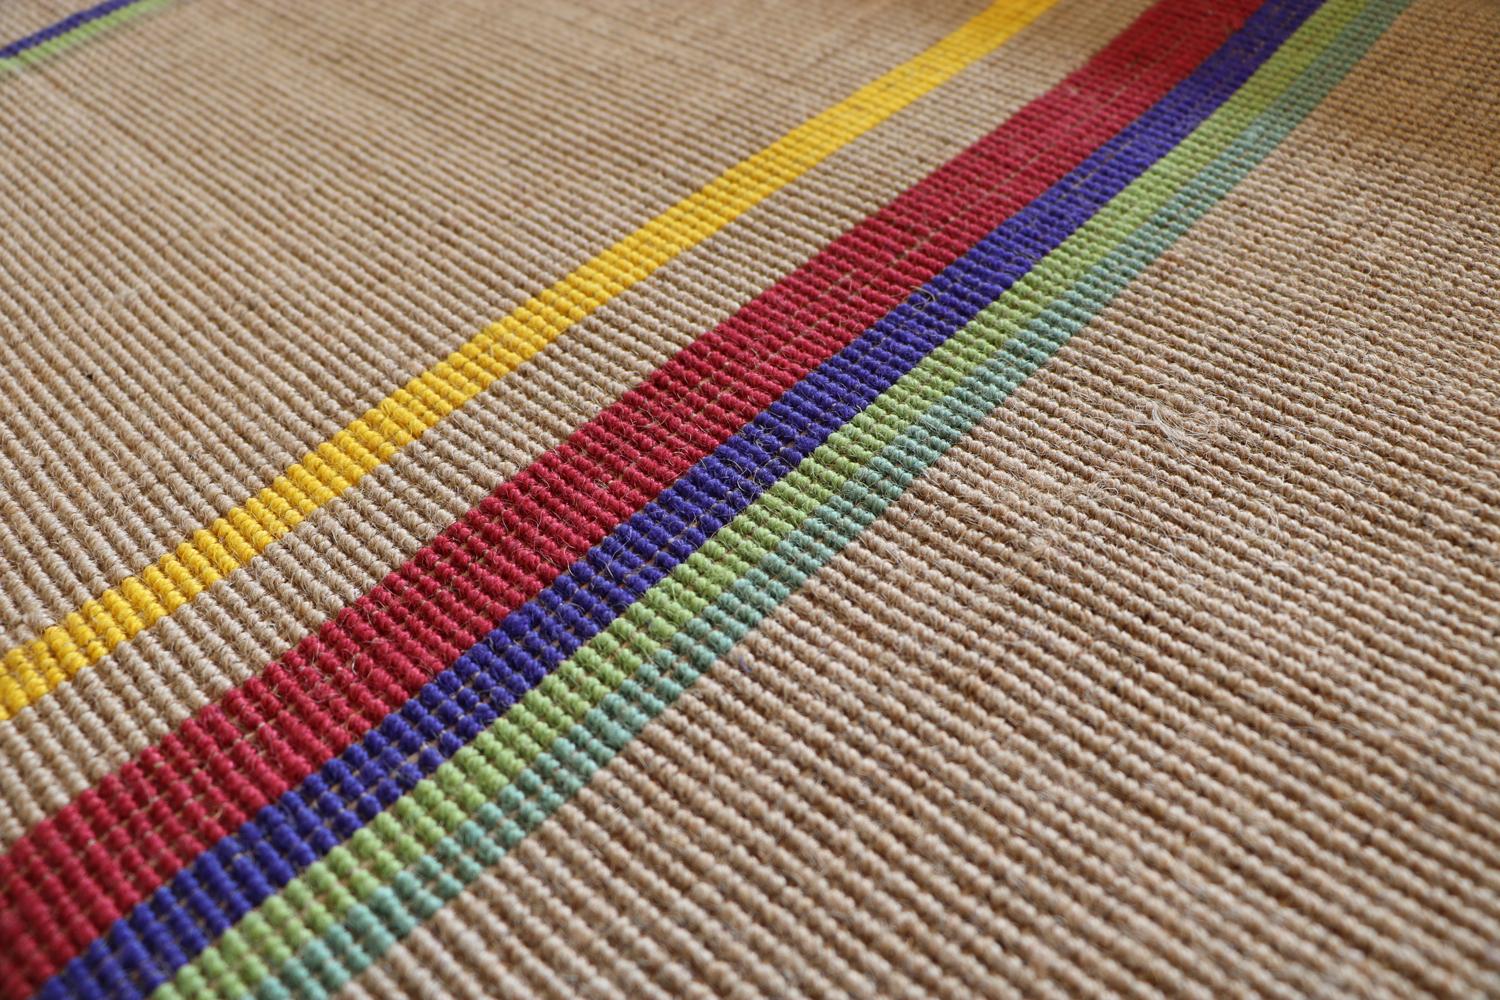 Jute Nature Inspired Striped Spring Thin Rug by Deanna Comellini In Stock 200x250 cm For Sale